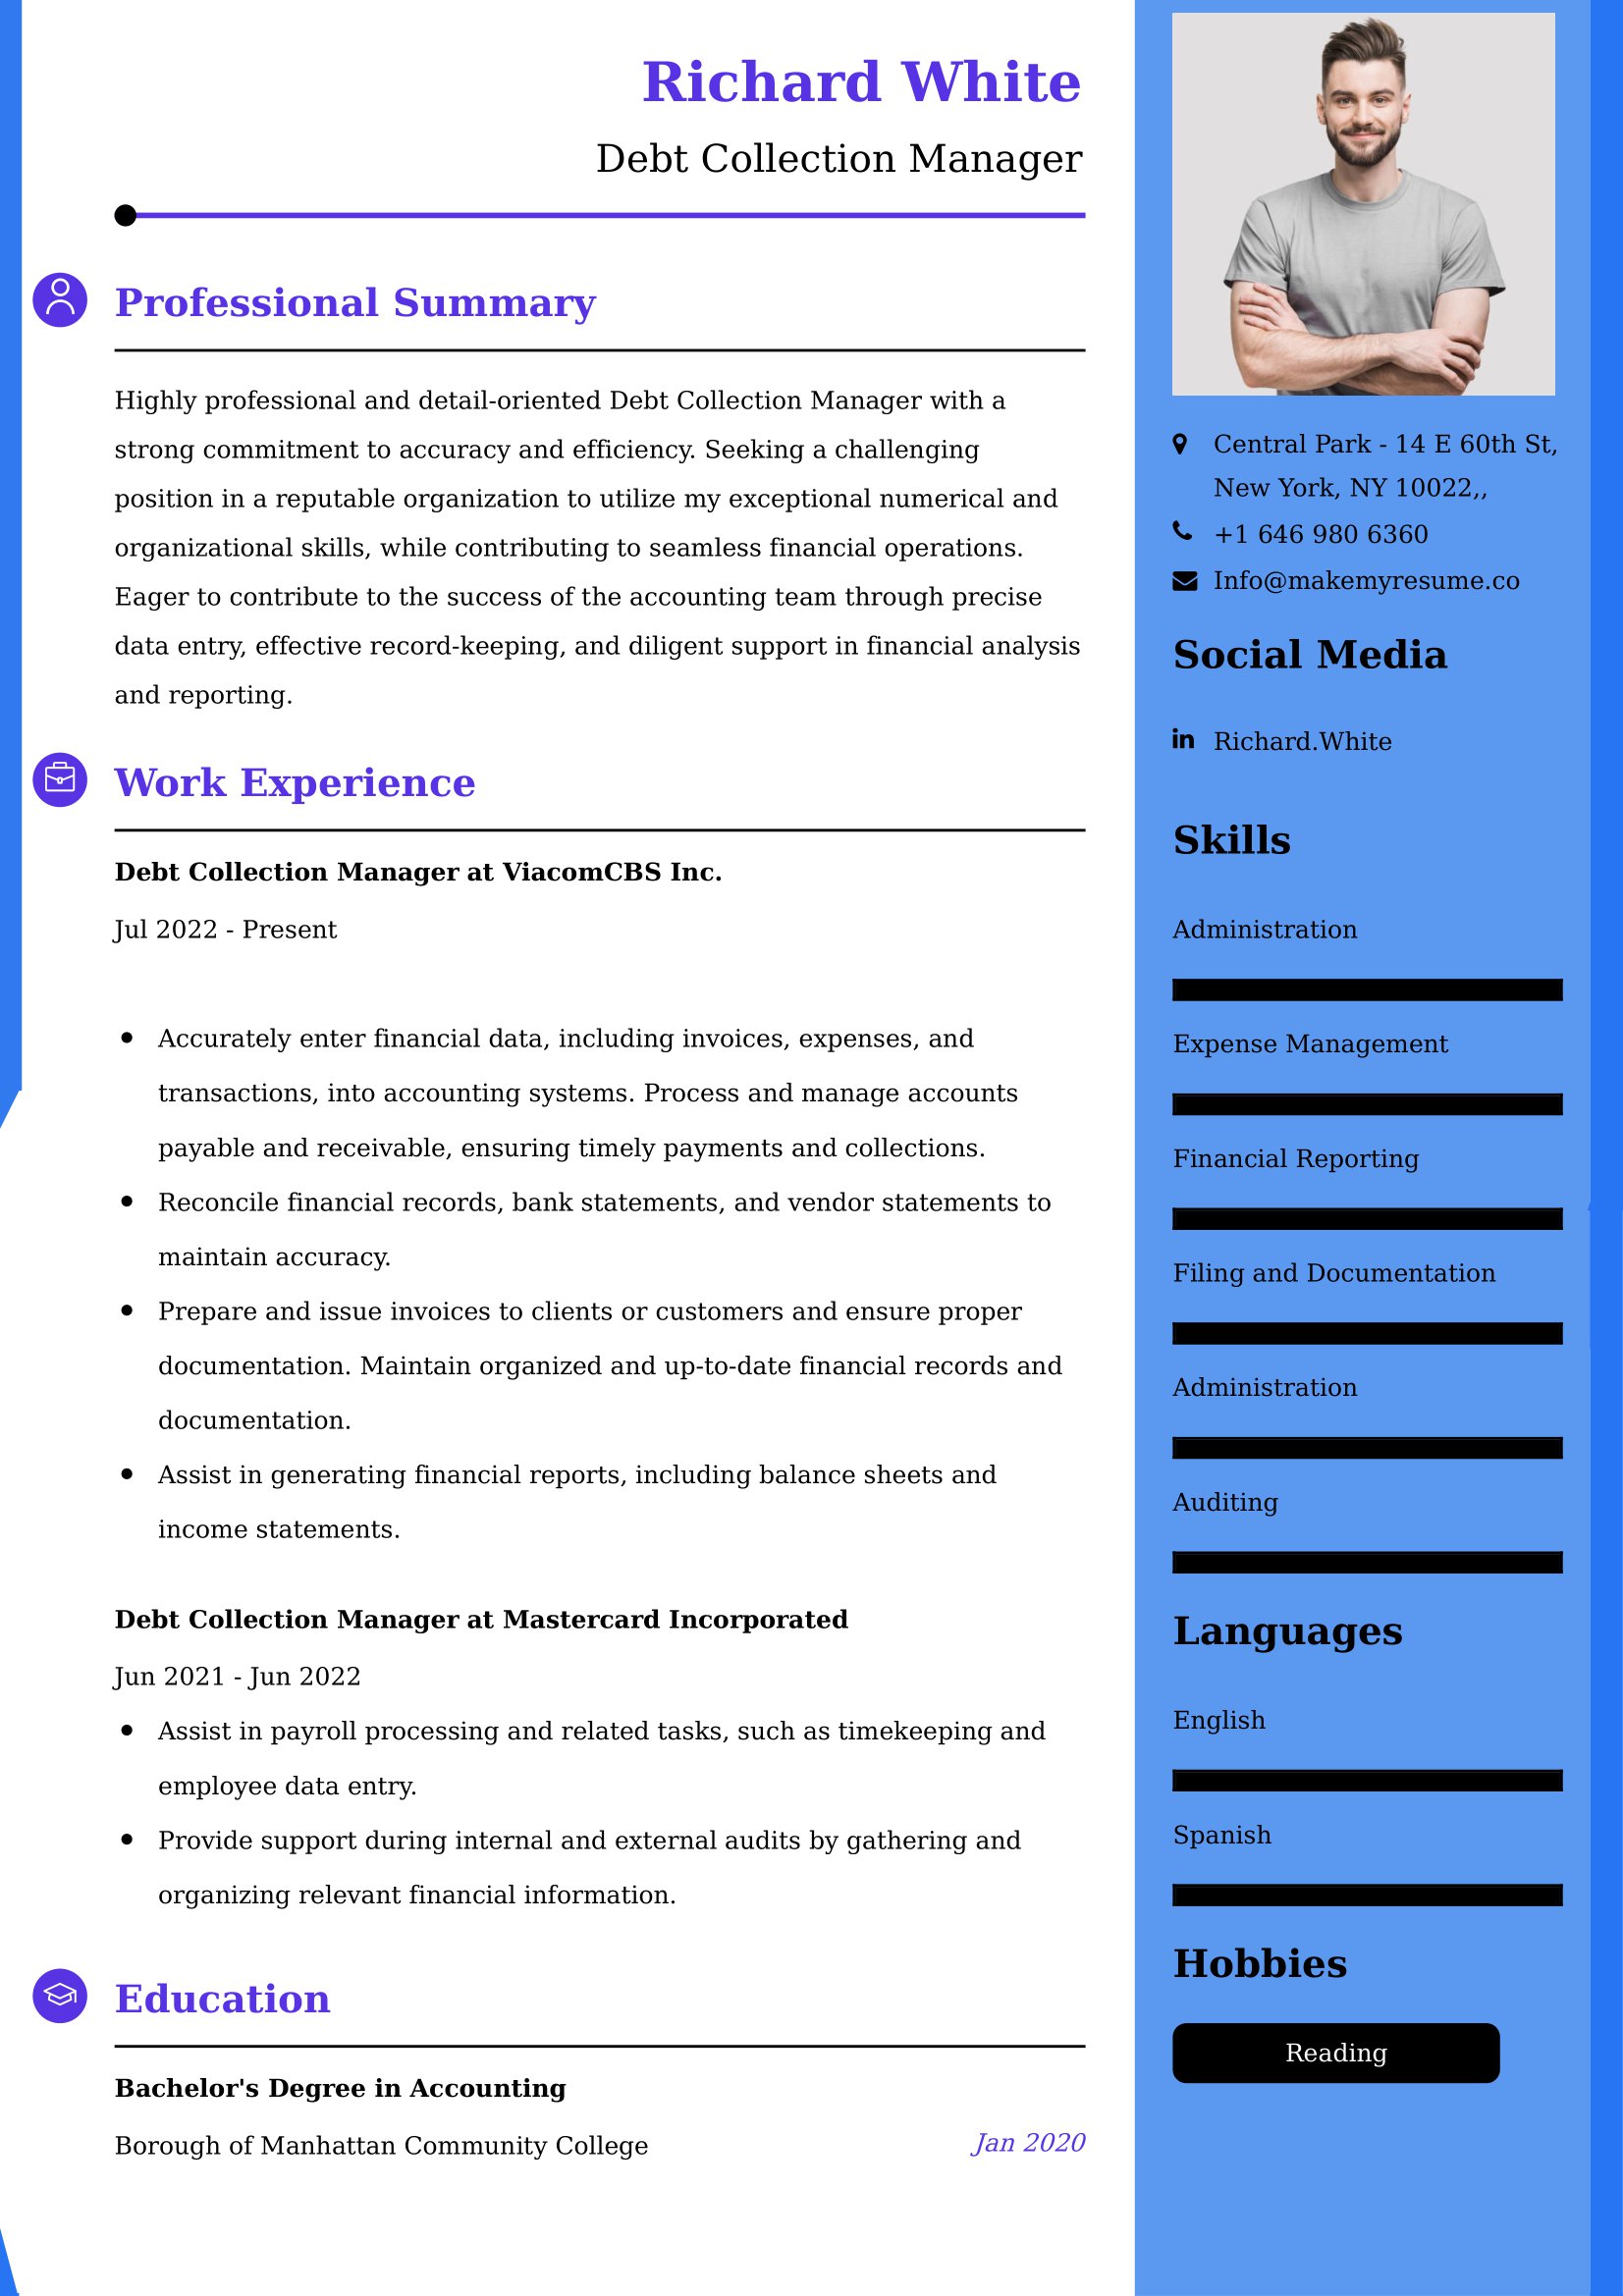 Debt Collection Manager Resume Examples - Brazilian Format, Latest Template